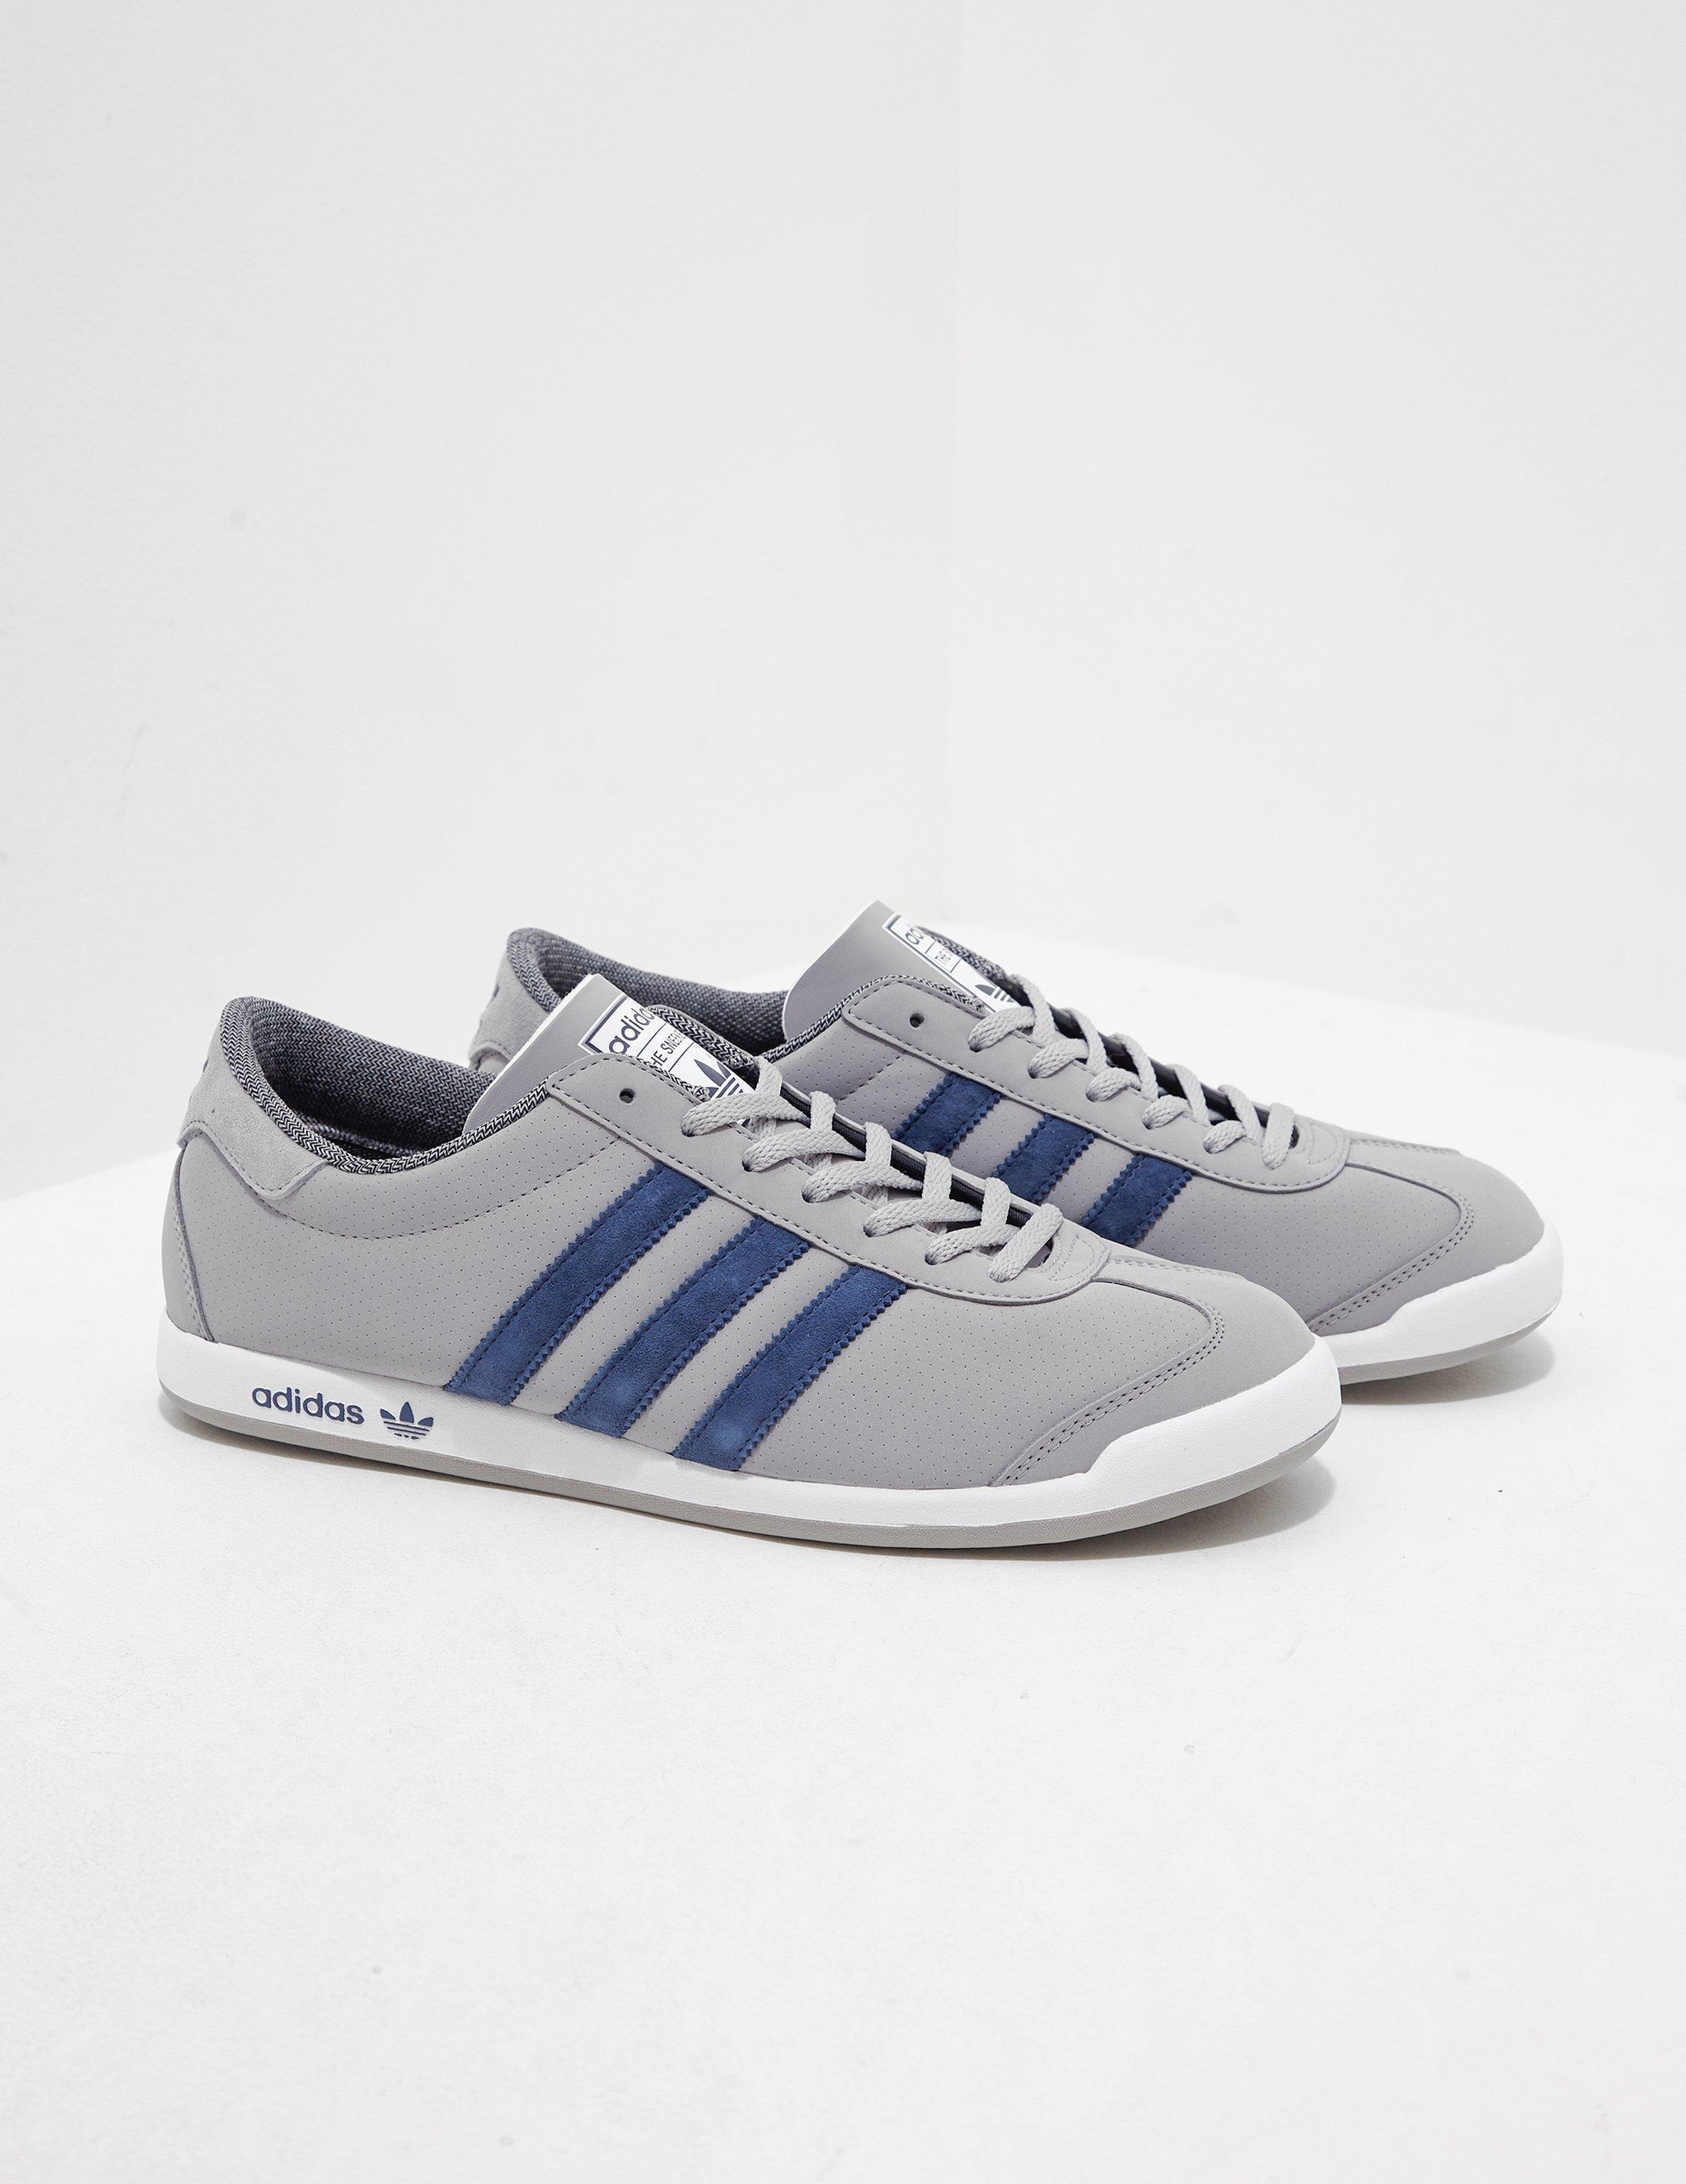 adidas Originals Leather The Sneeker - Exclusively To Tessuti Grey in ...